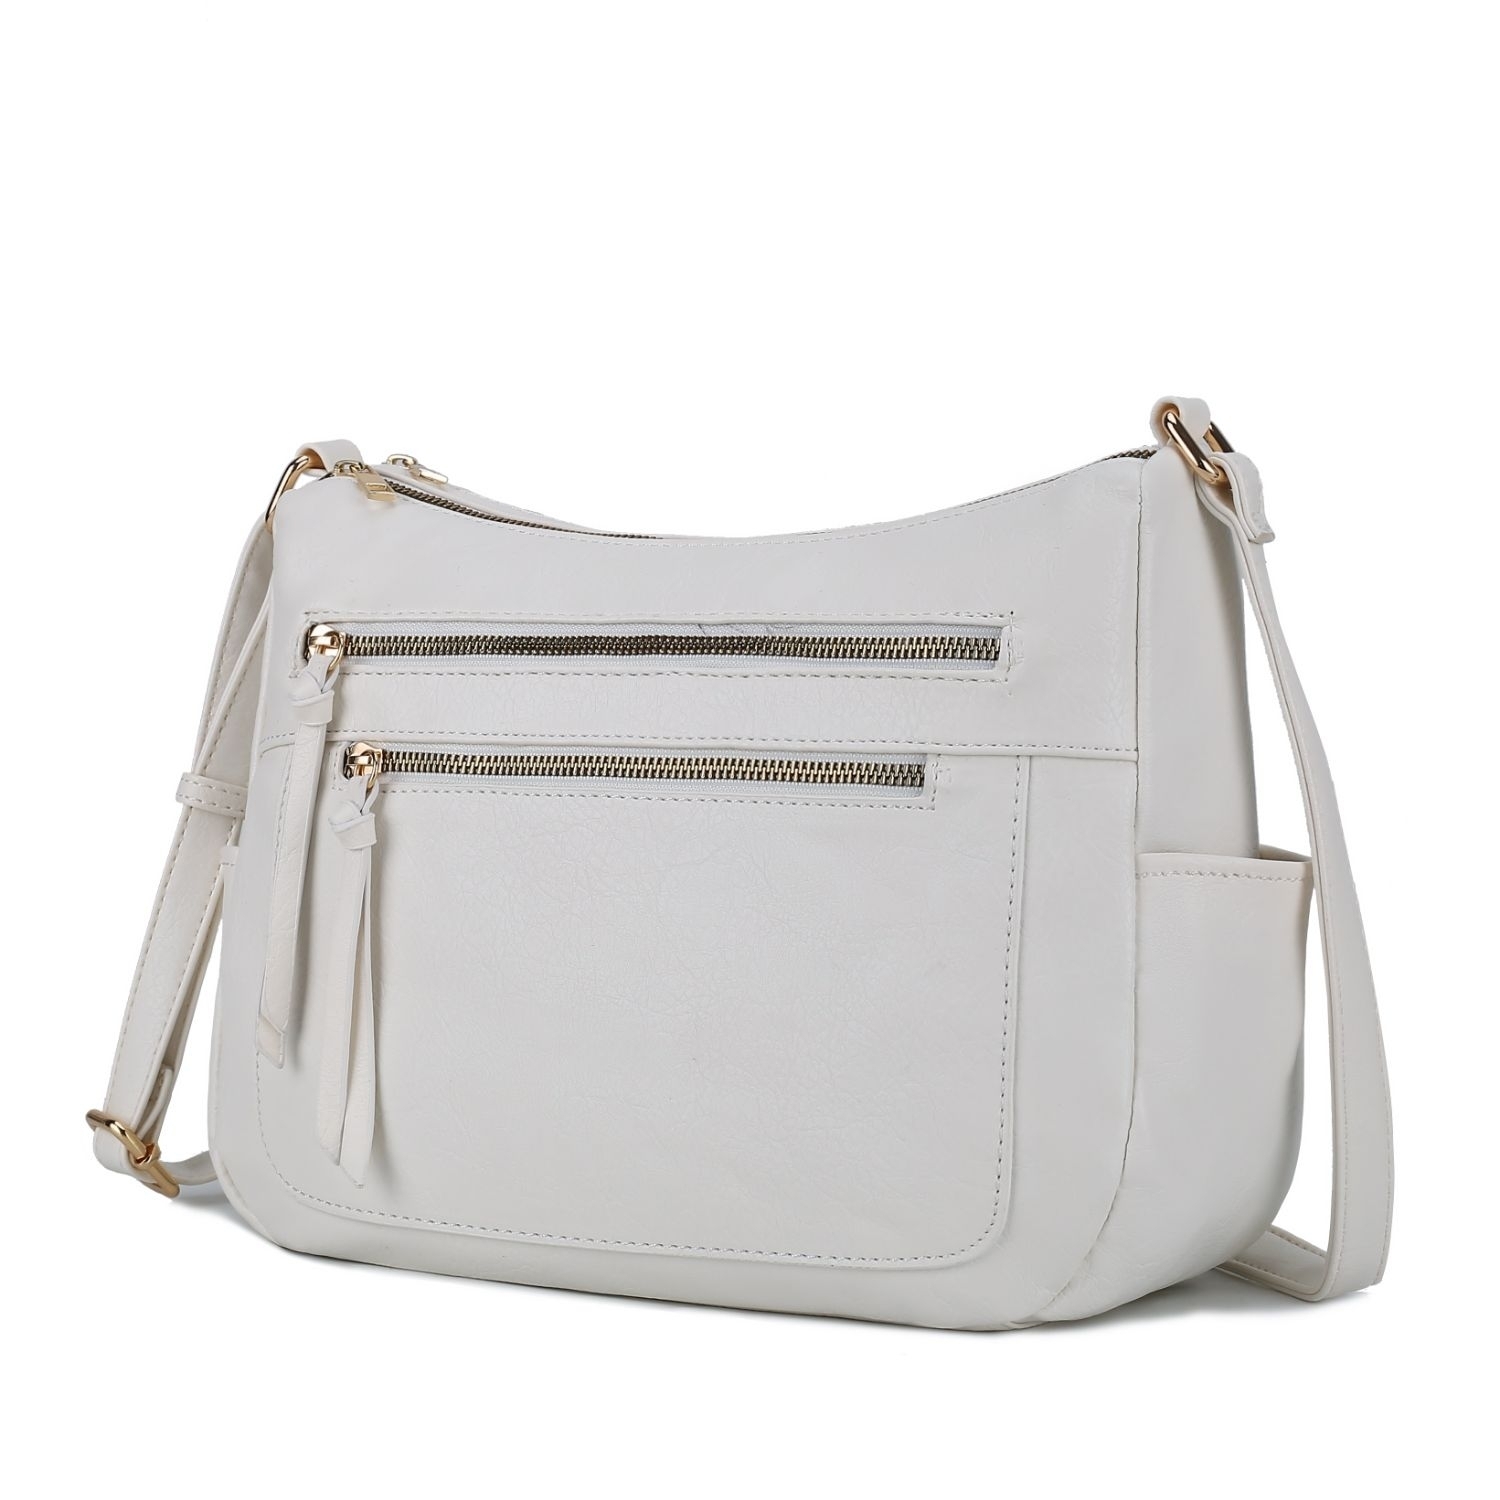 MKF Collection Zilla Vegan Leather Women's Shoulder Bag By Mia K - White